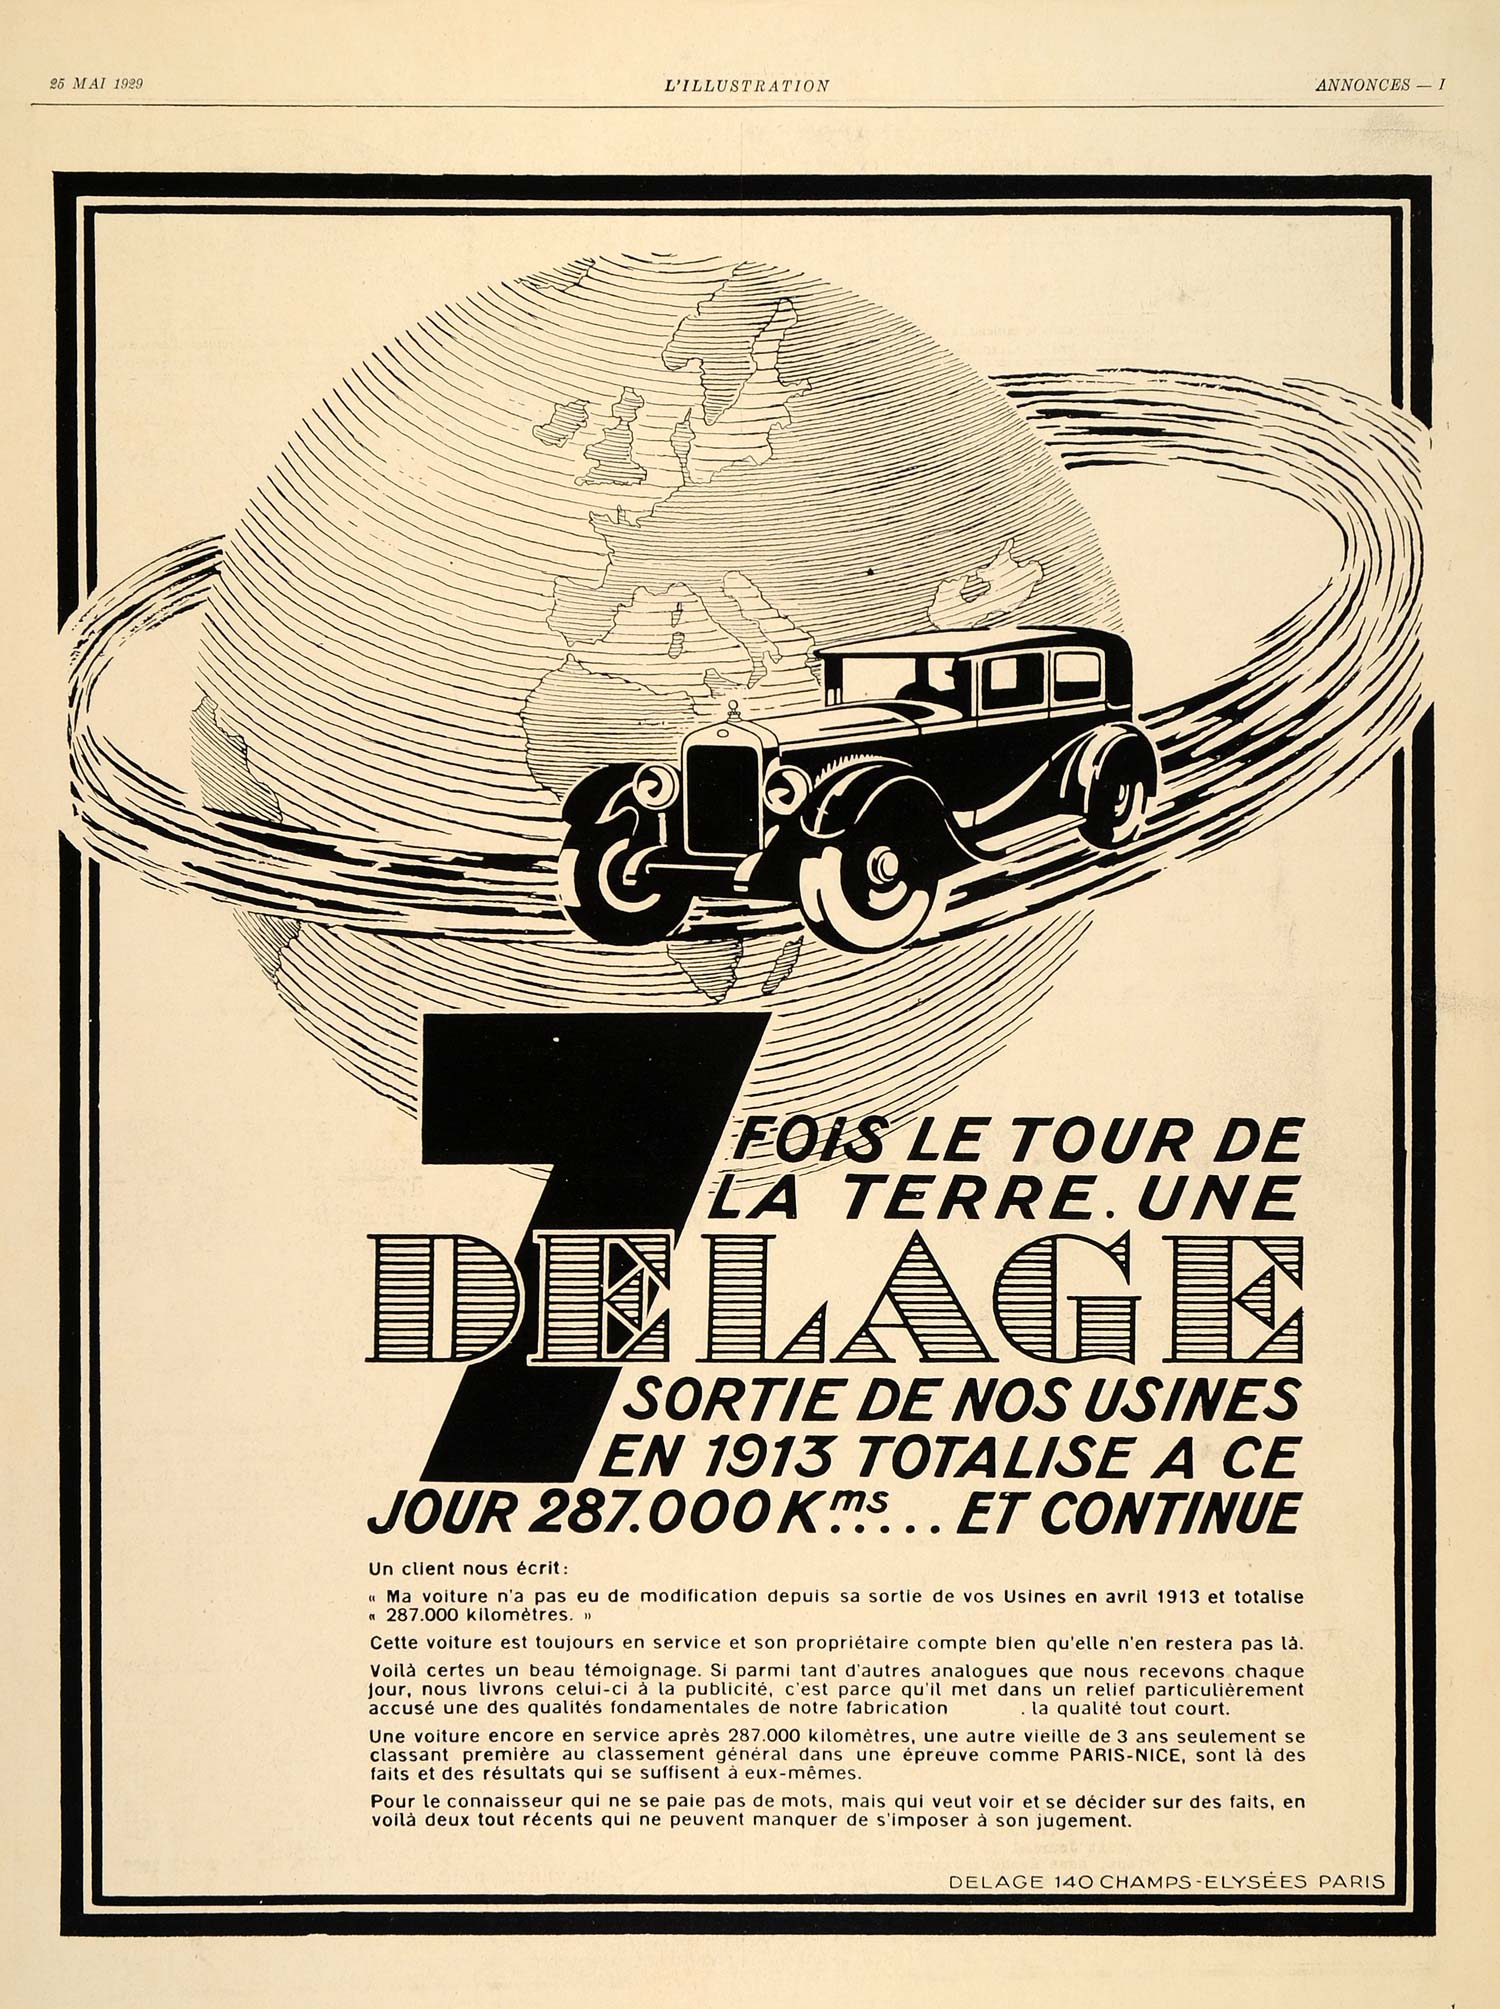 1929 Ad French Delage Luxury Car Racing Automobile Tour - ORIGINAL ILL3